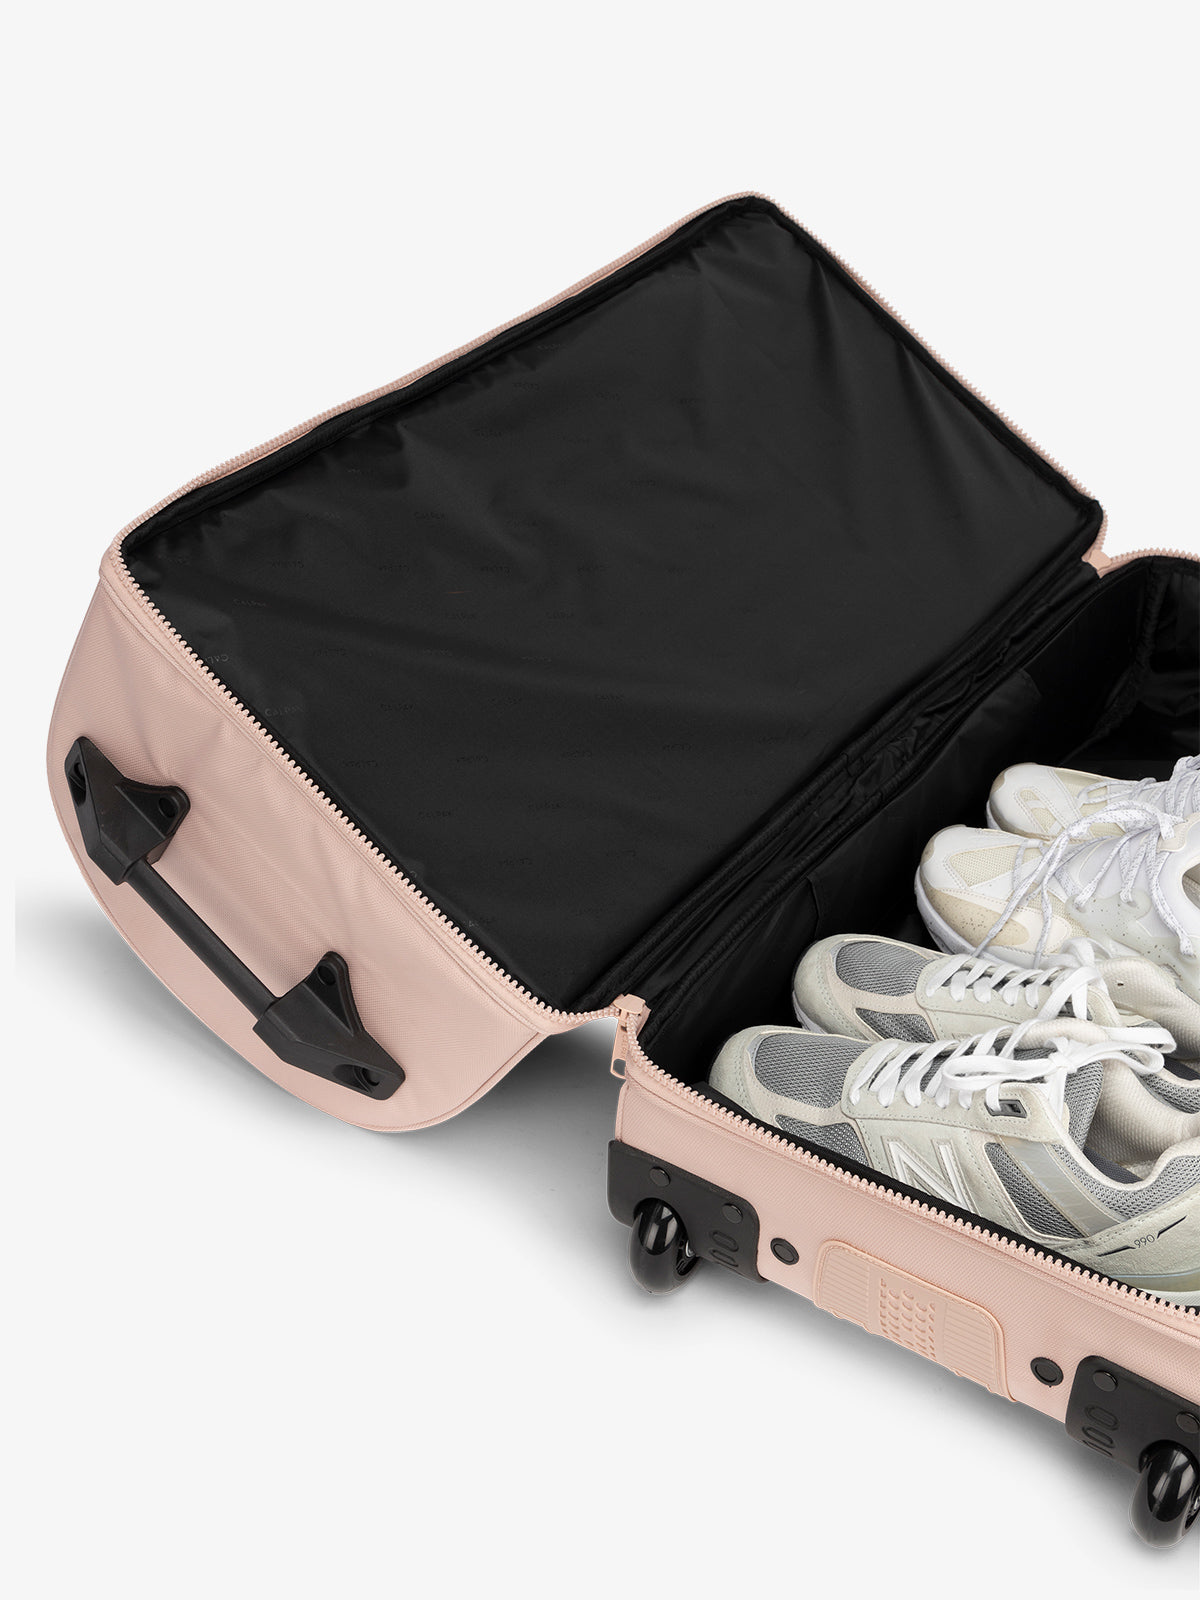 Interior of large shoe compartment in the rolling travel duffel bag in pink sand